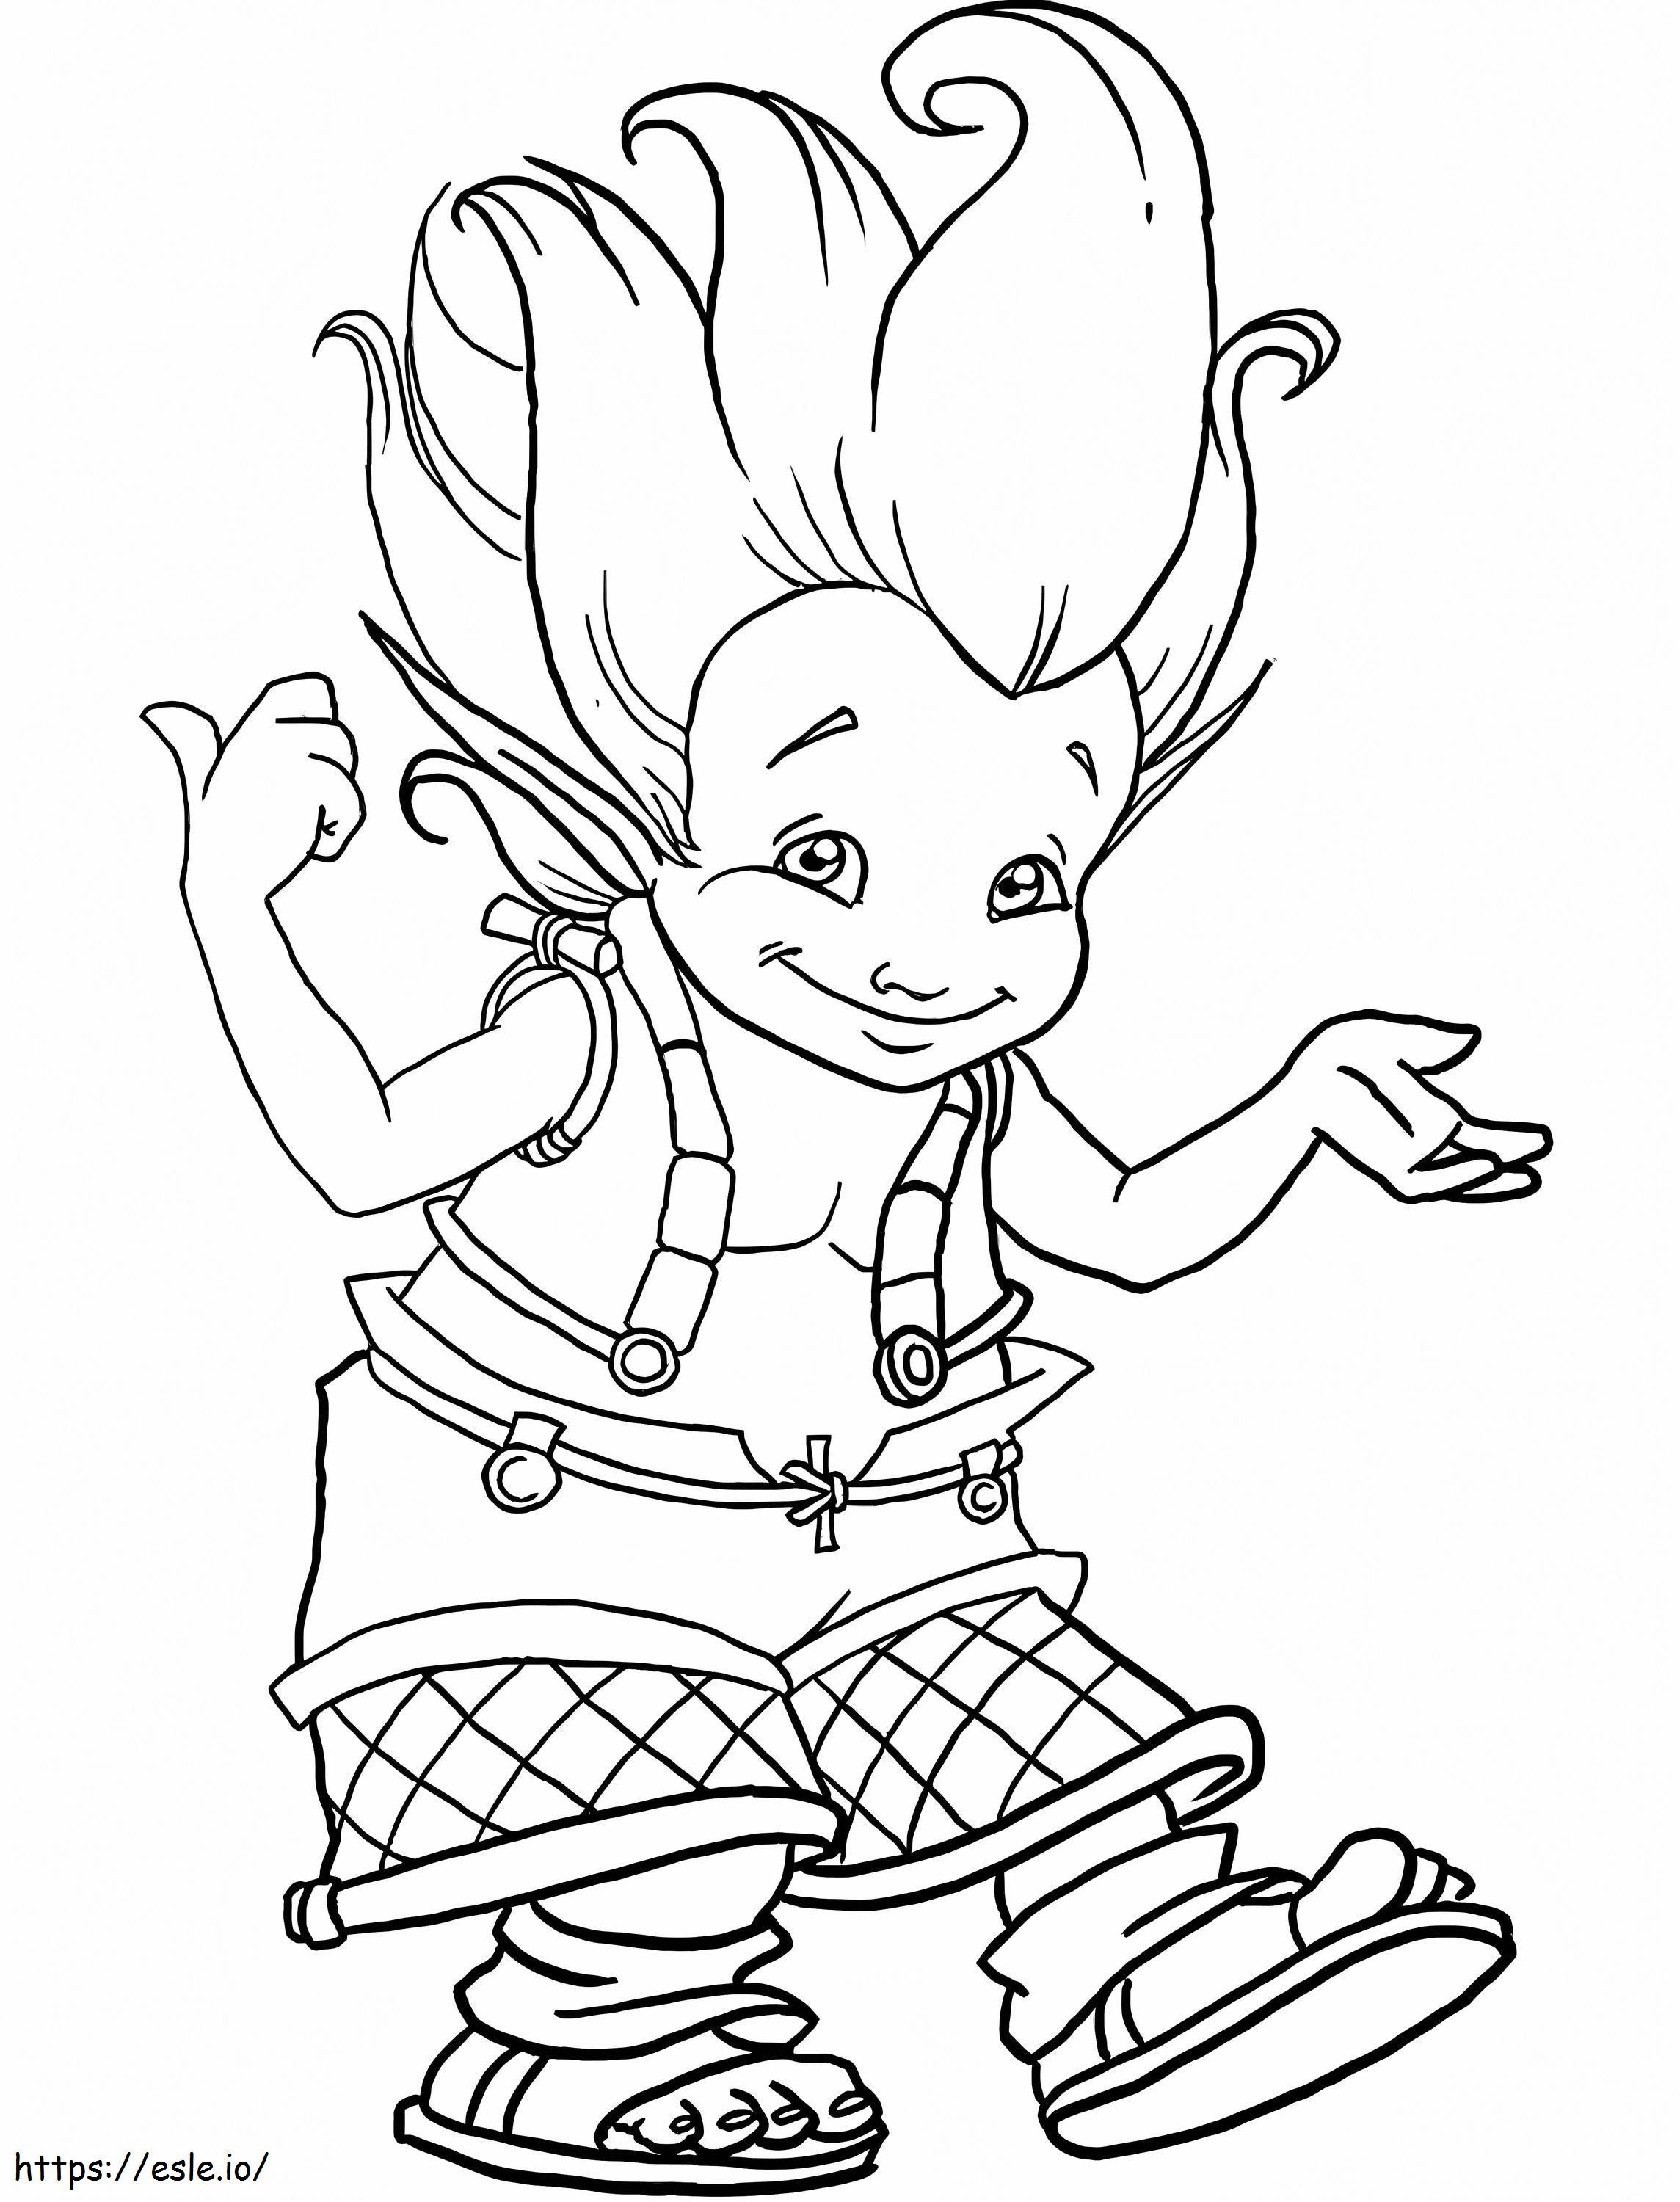 1566892235 Betameche Smiling A4 coloring page